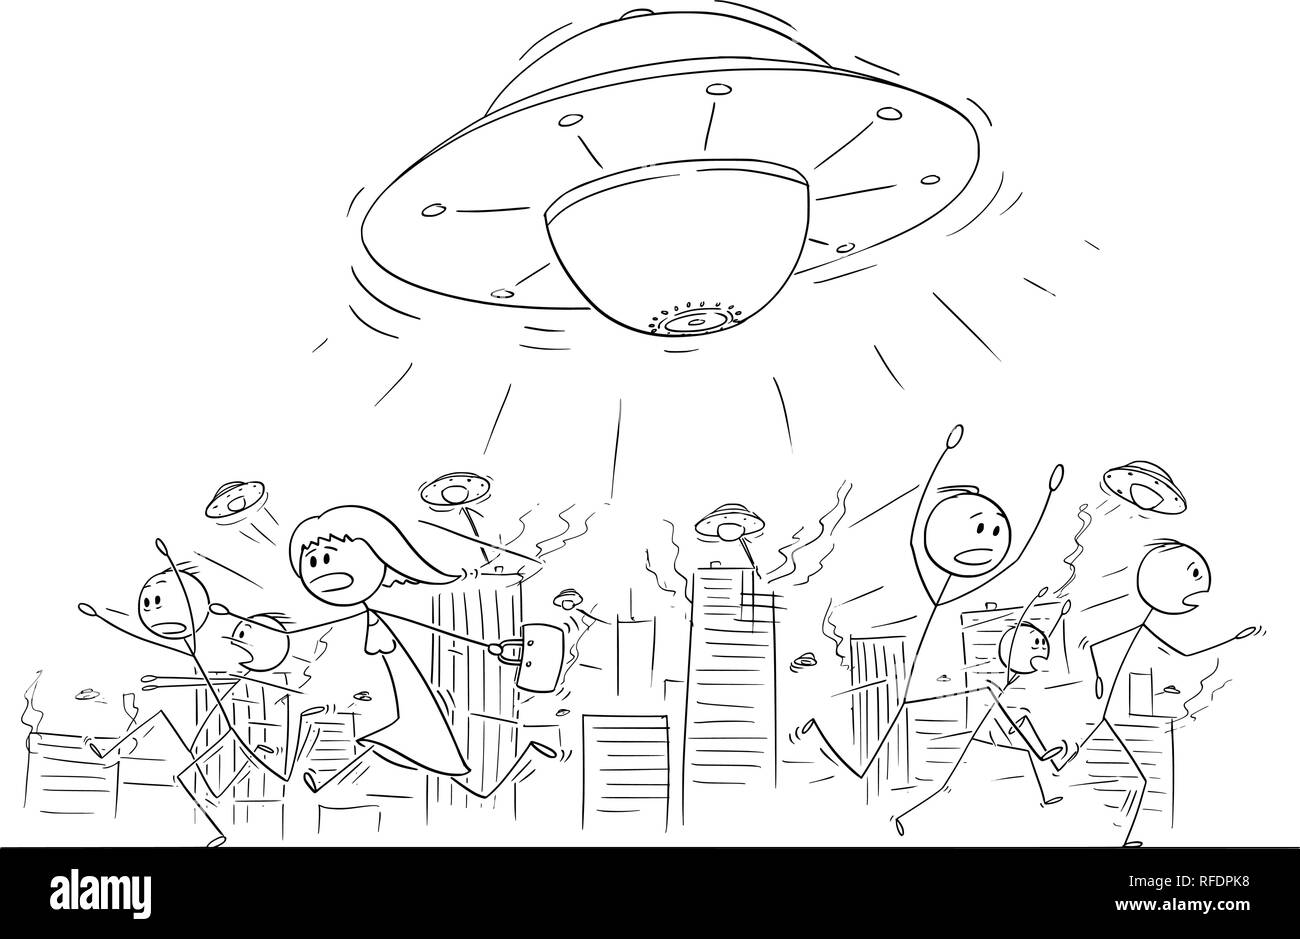 Cartoon Drawing of Crowd of People Running in Panic Away From UFO or Alien Ships Attacking City Stock Vector